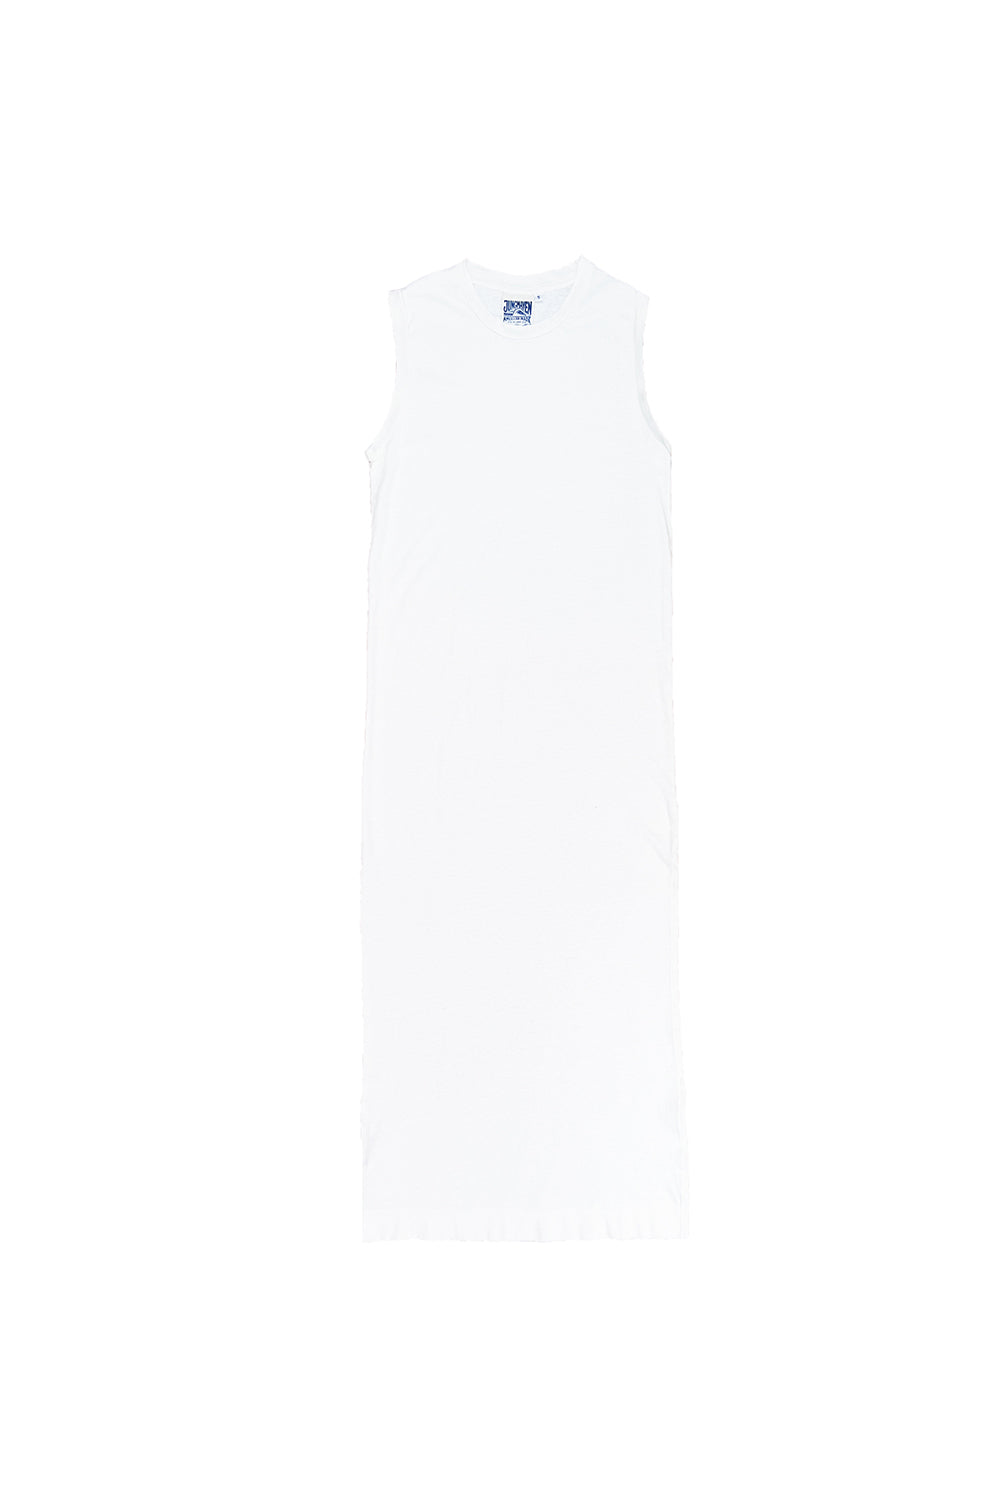 Hermosa Dress | Jungmaven Hemp Clothing & Accessories / Color: Washed White